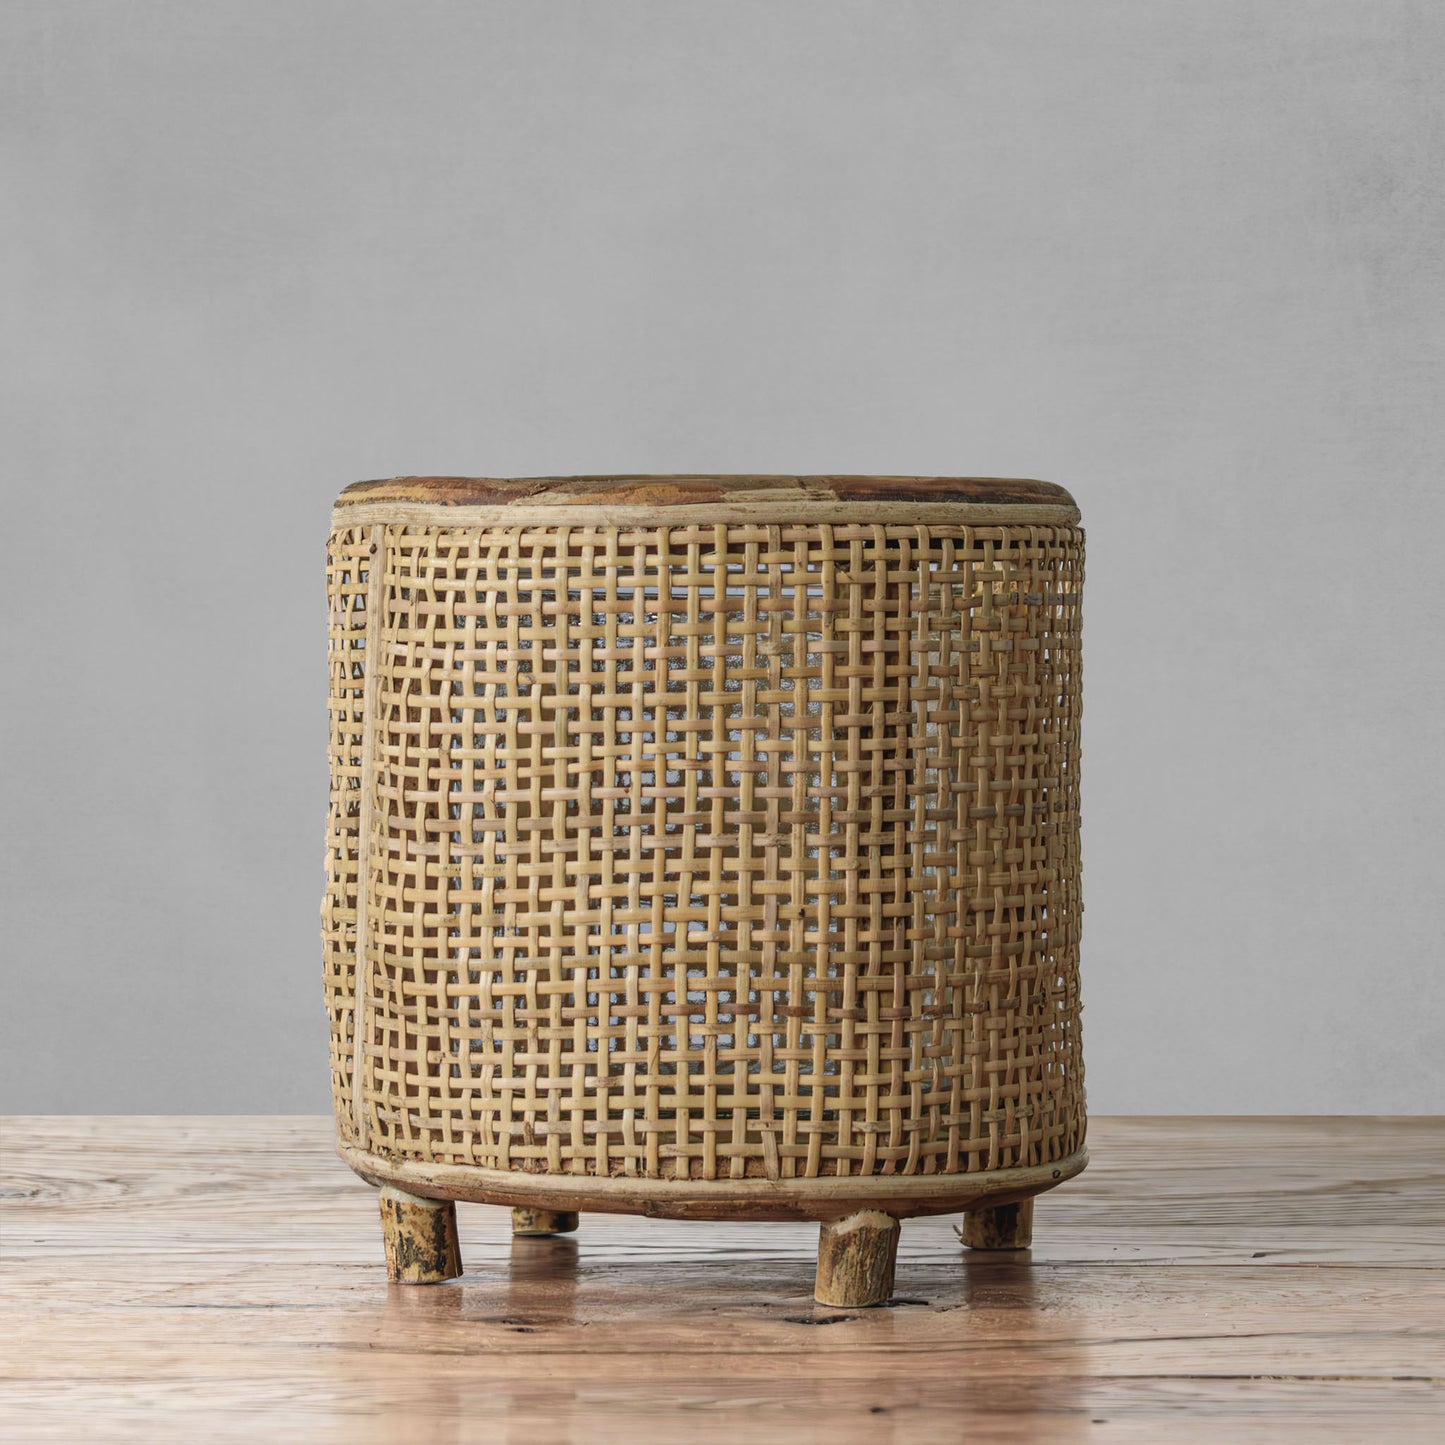 Rattan round hurricane candle holder on wooden table with gray background.